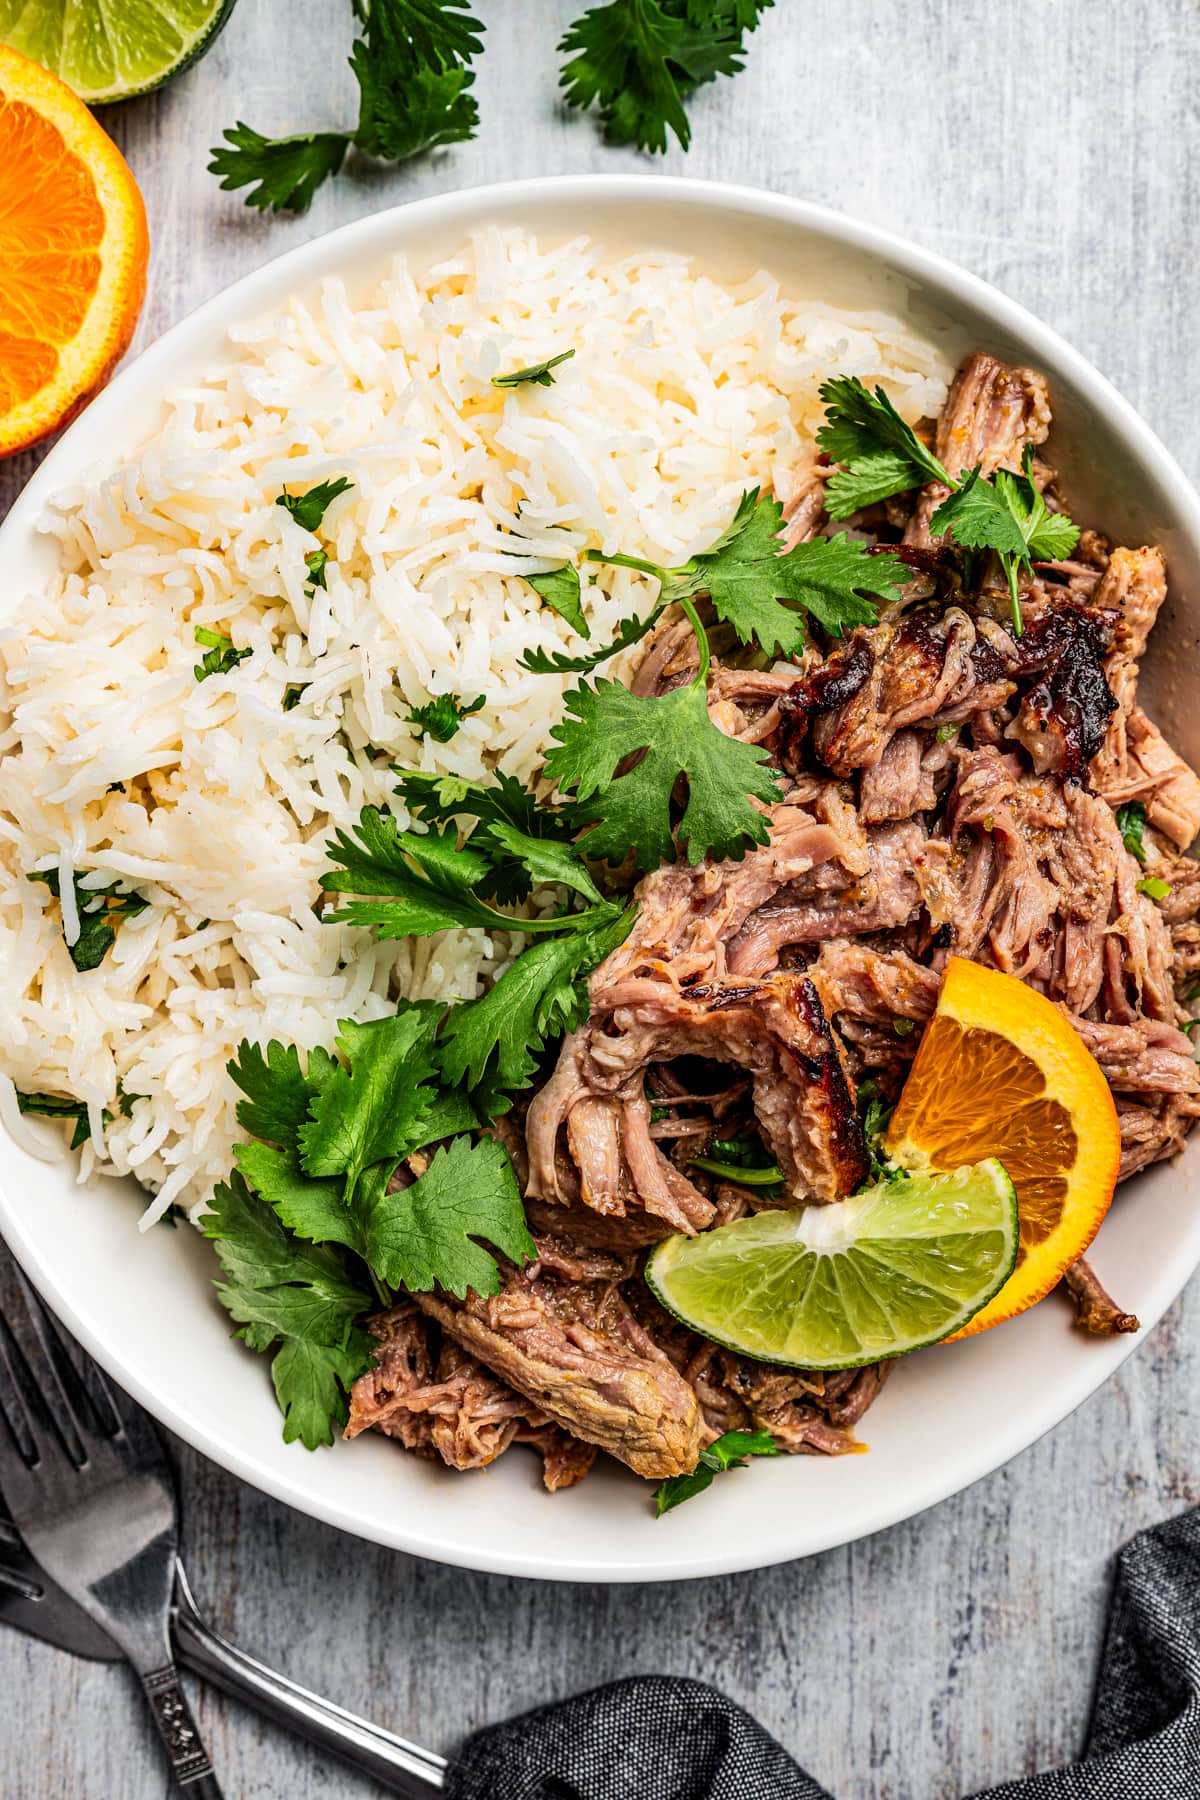 Overhead image of a dinner plate full of rice and mojo pork garnished with cilantro and orange slices.